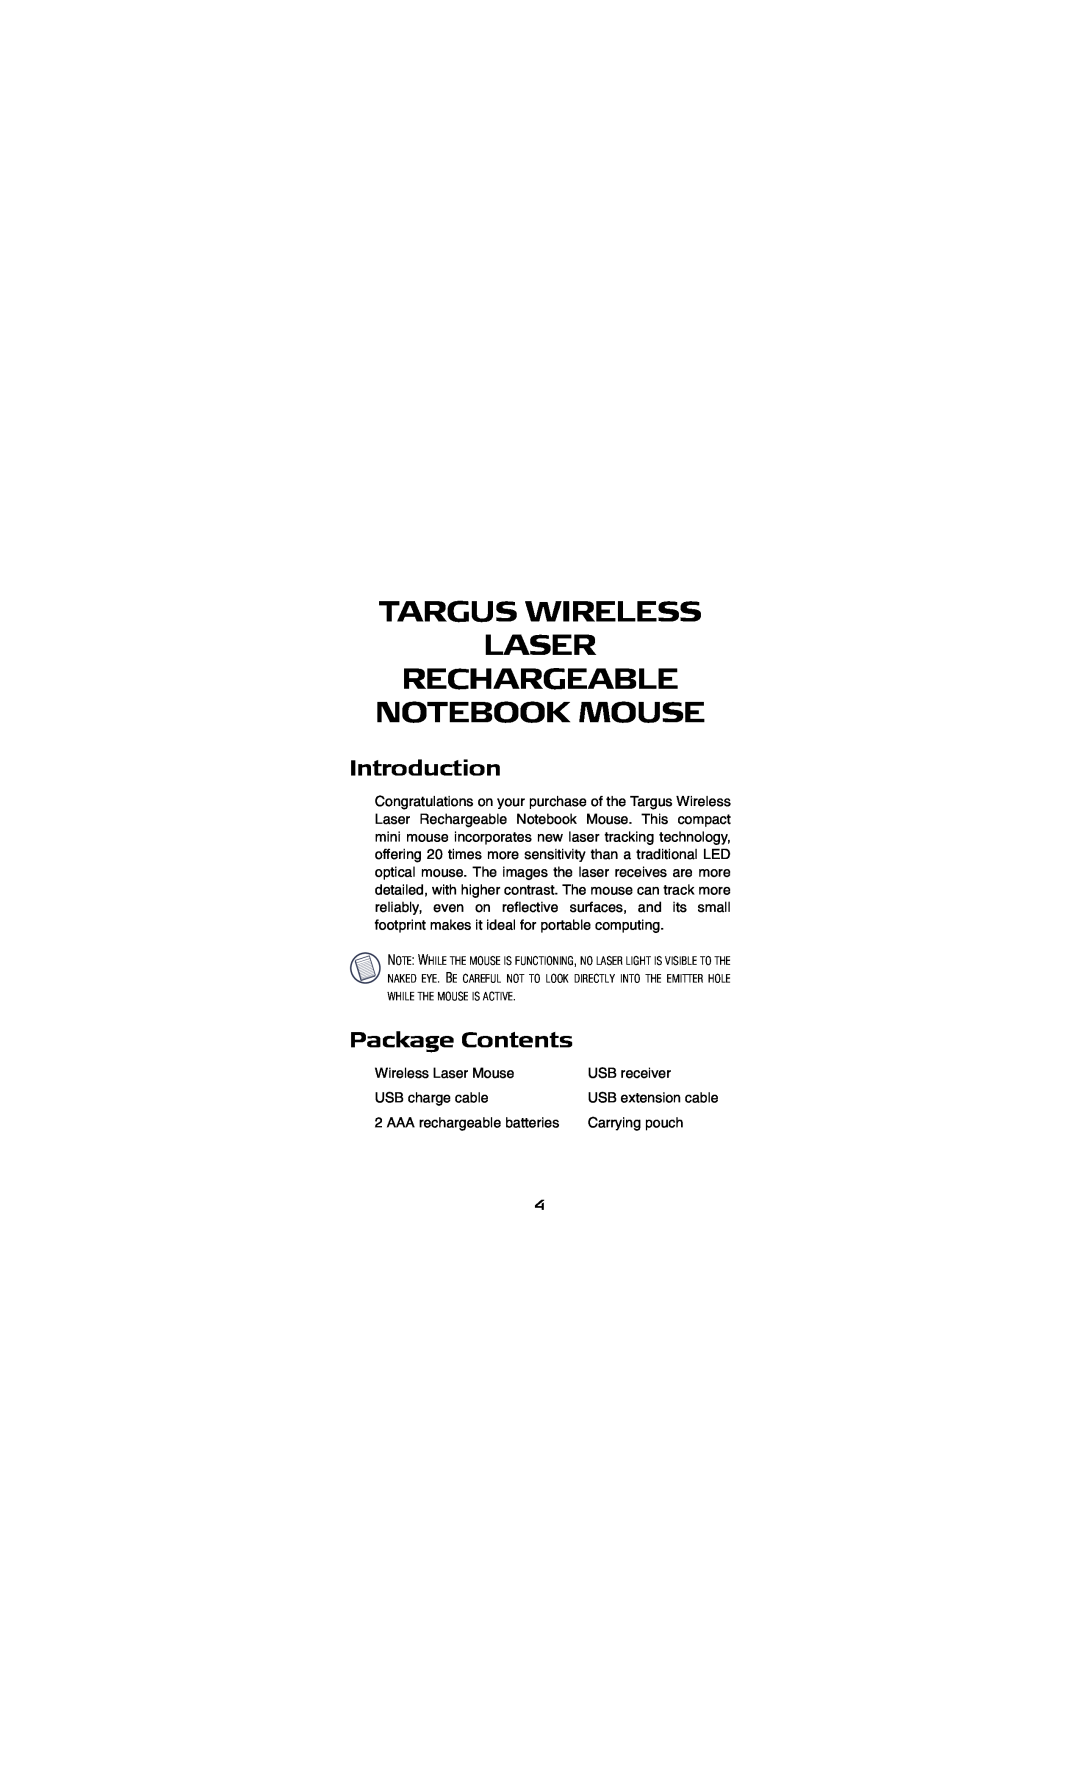 Targus AMW15EU specifications Targus Wireless Laser Rechargeable Notebook Mouse, Introduction, Package Contents 